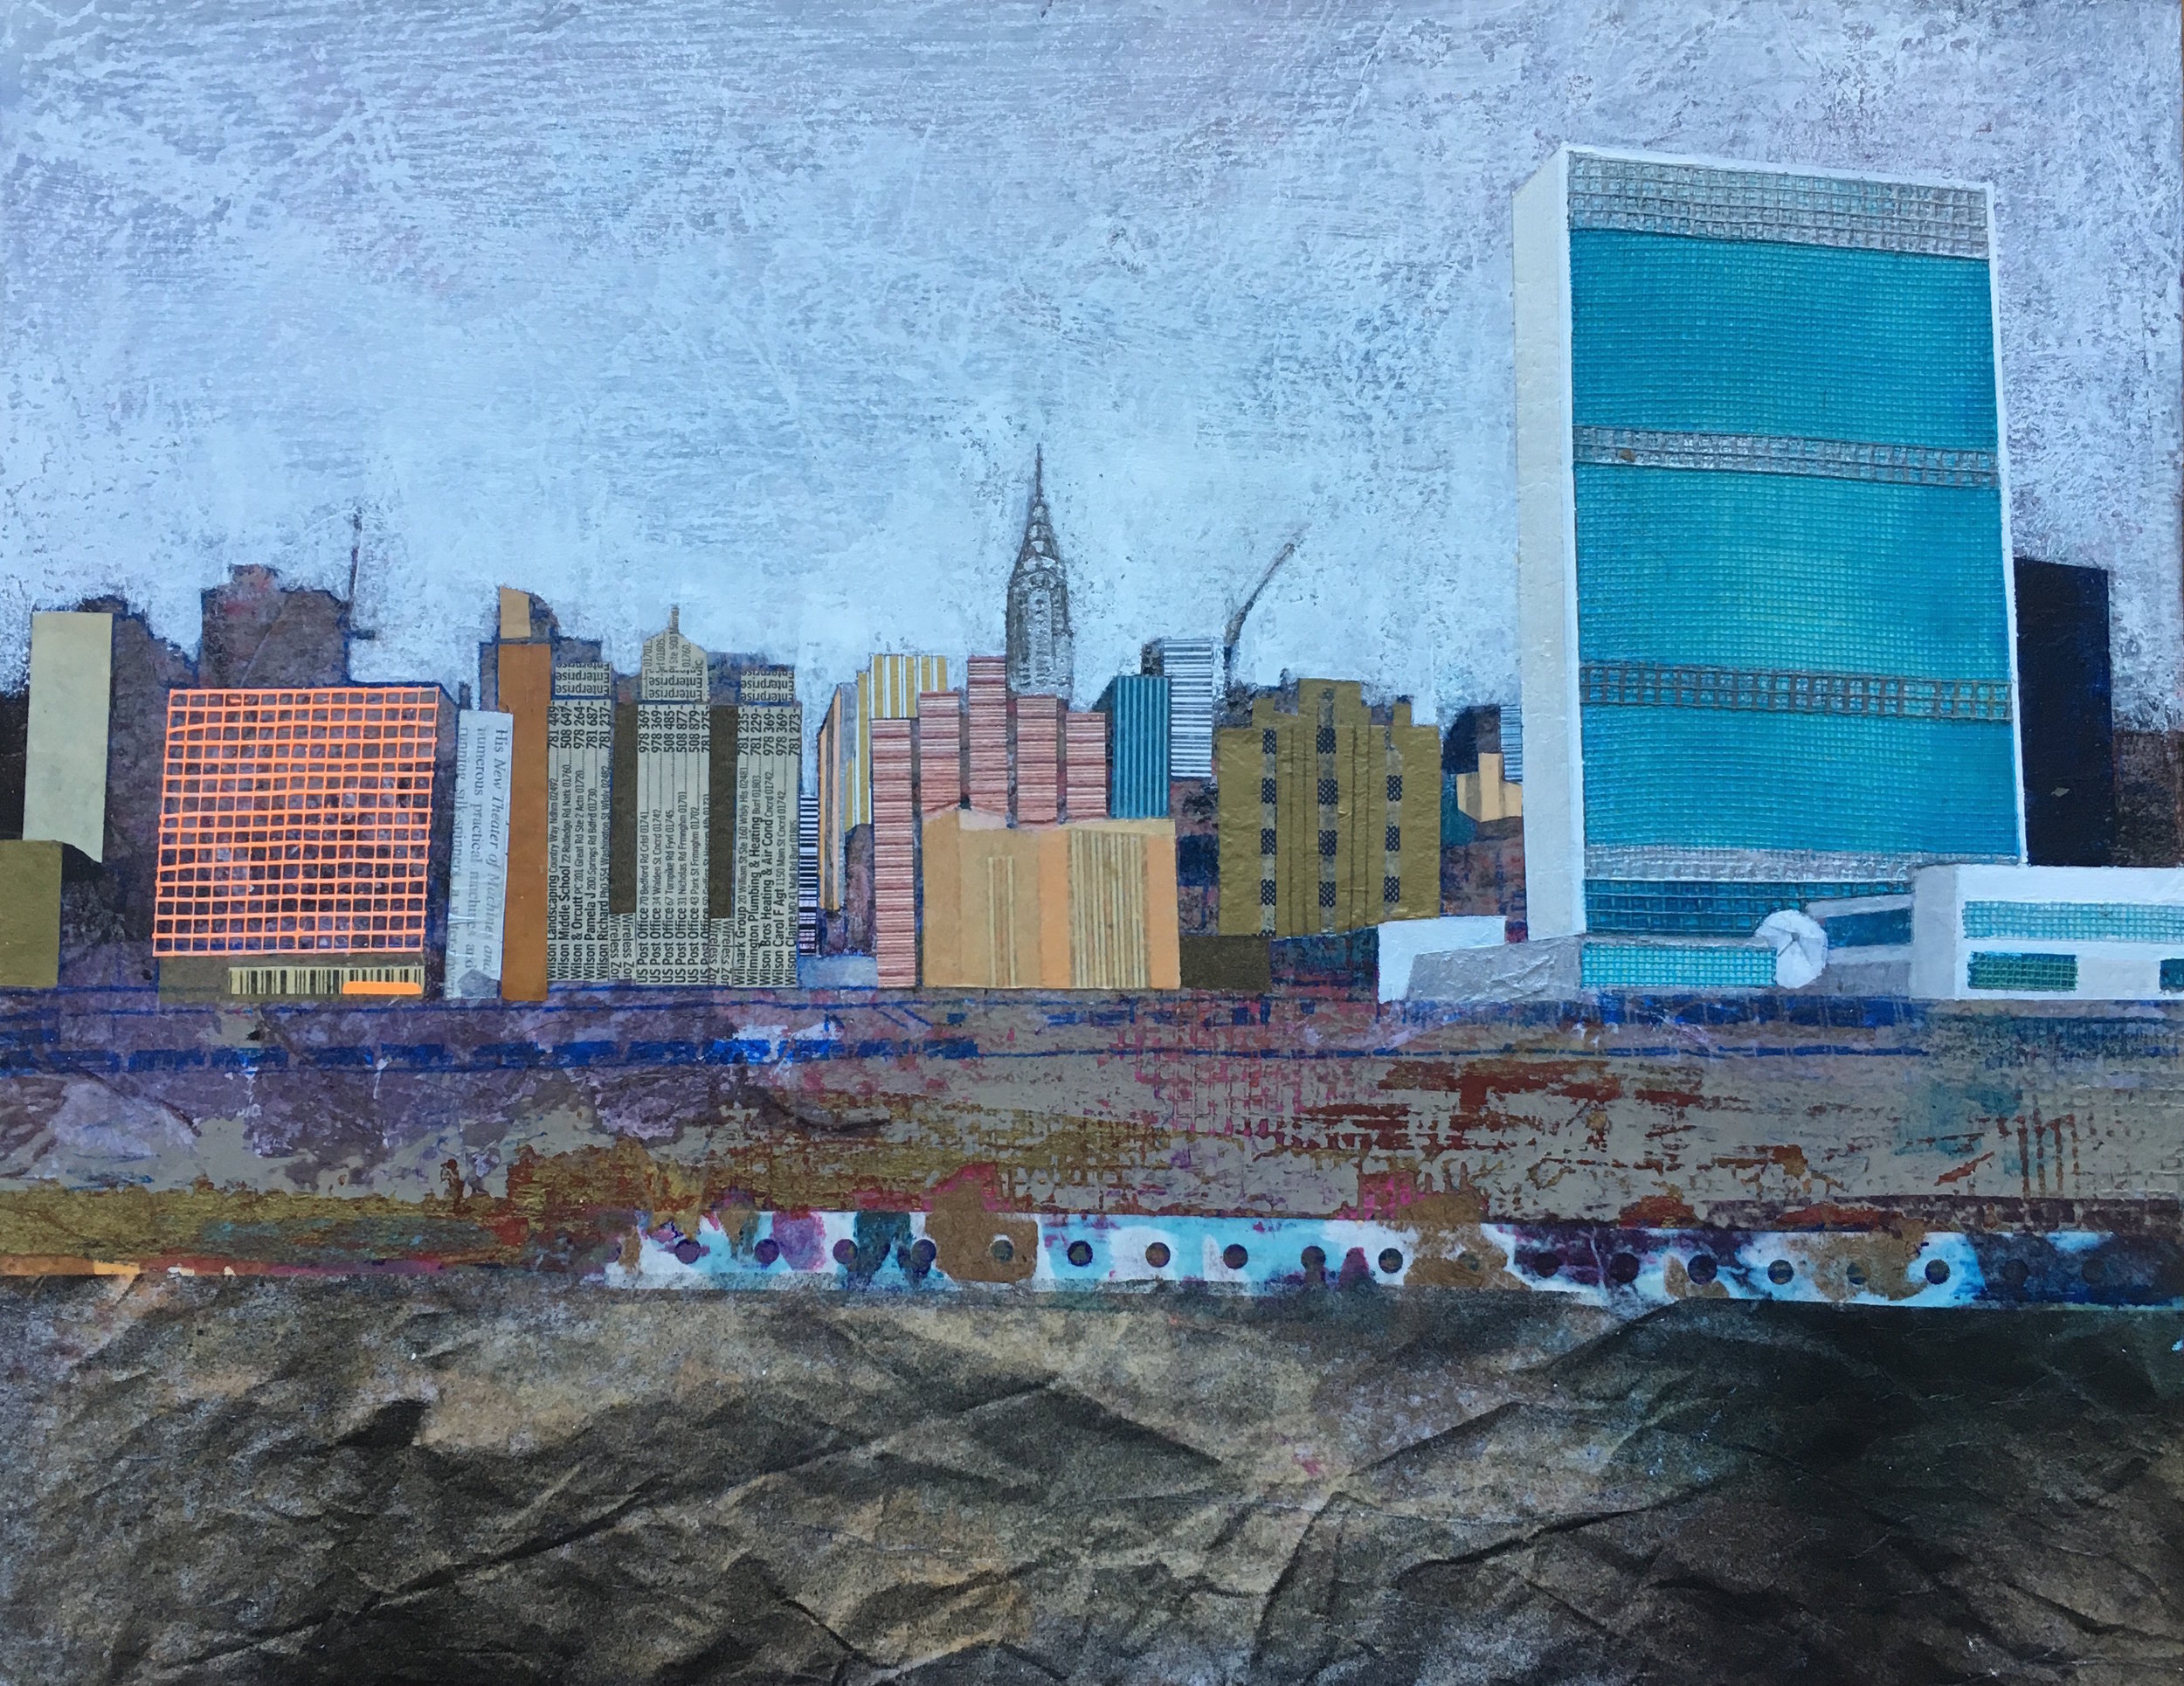   East River        11”x 14” Mixed Media on Wood Panel. 